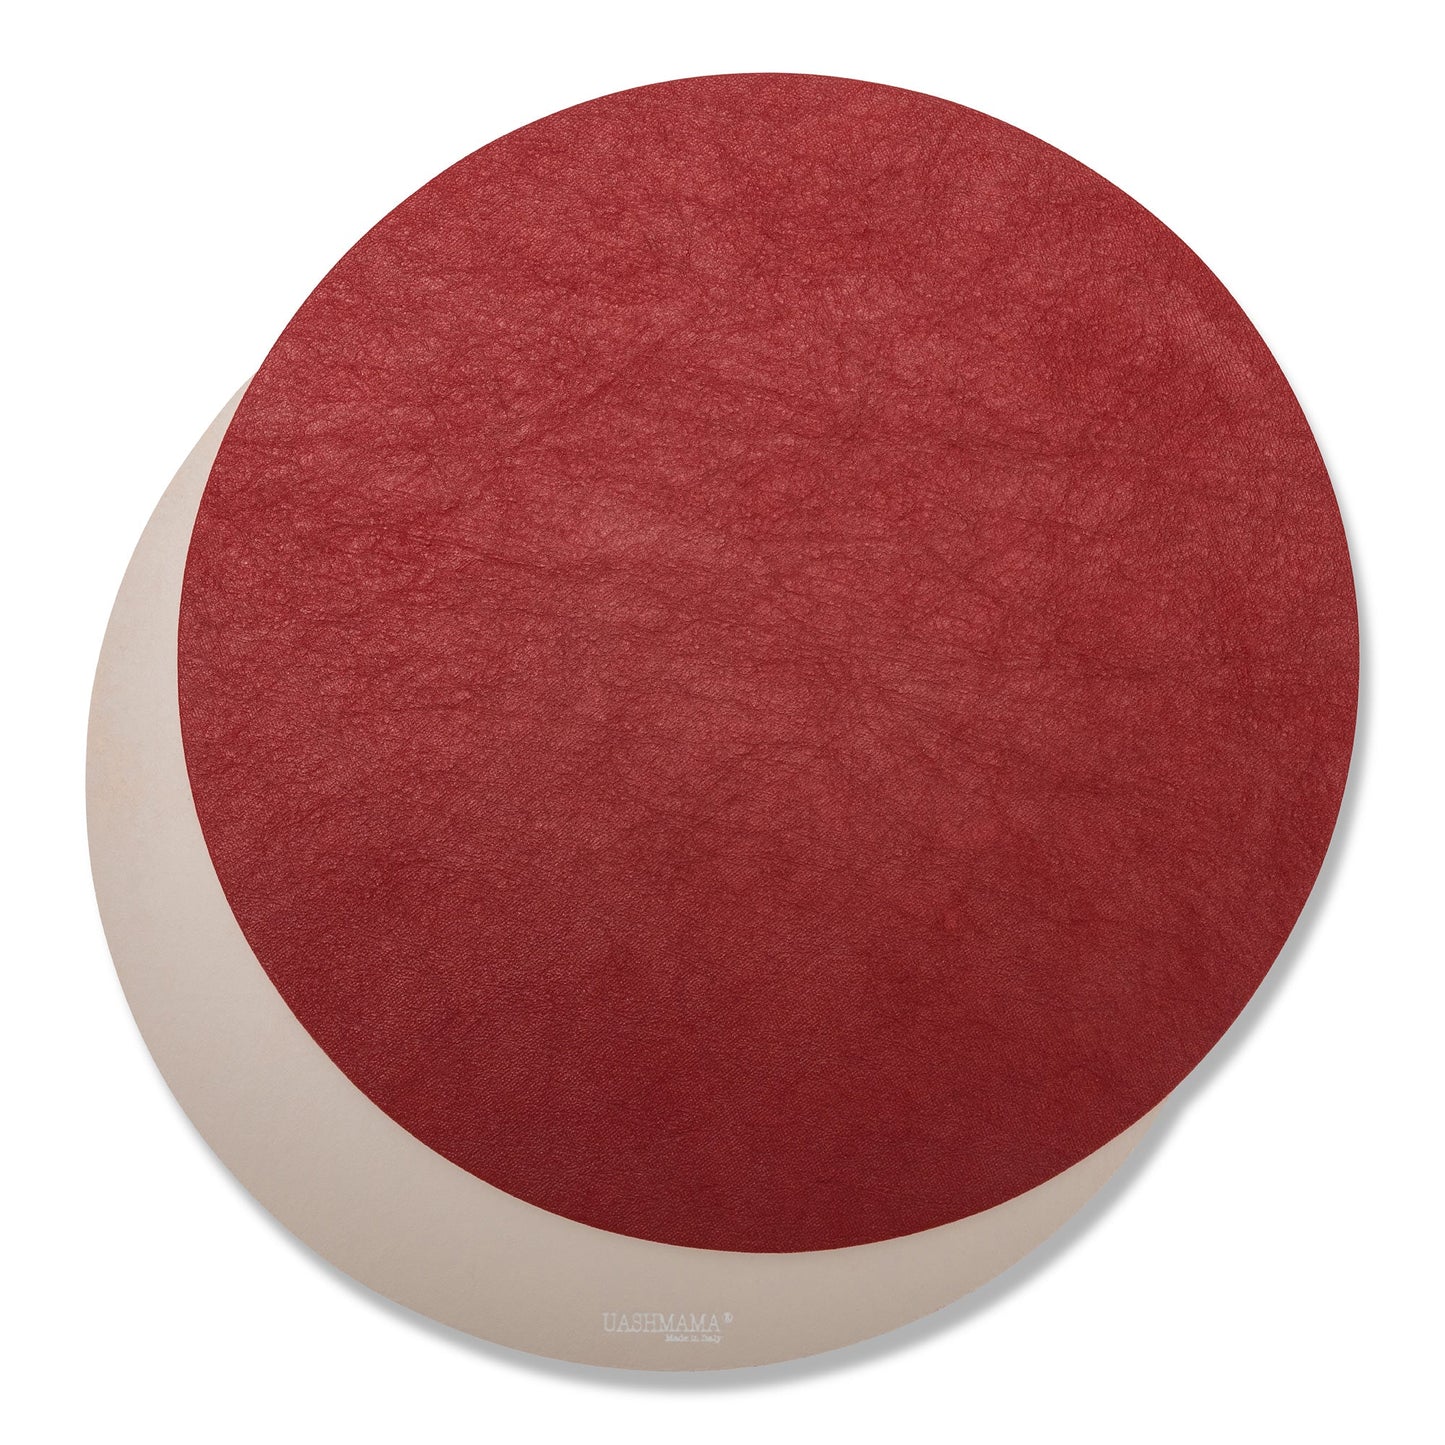 Two round washable paper placemats are shown one on top of the other. The one in the foreground is red and the one at rear is beige.